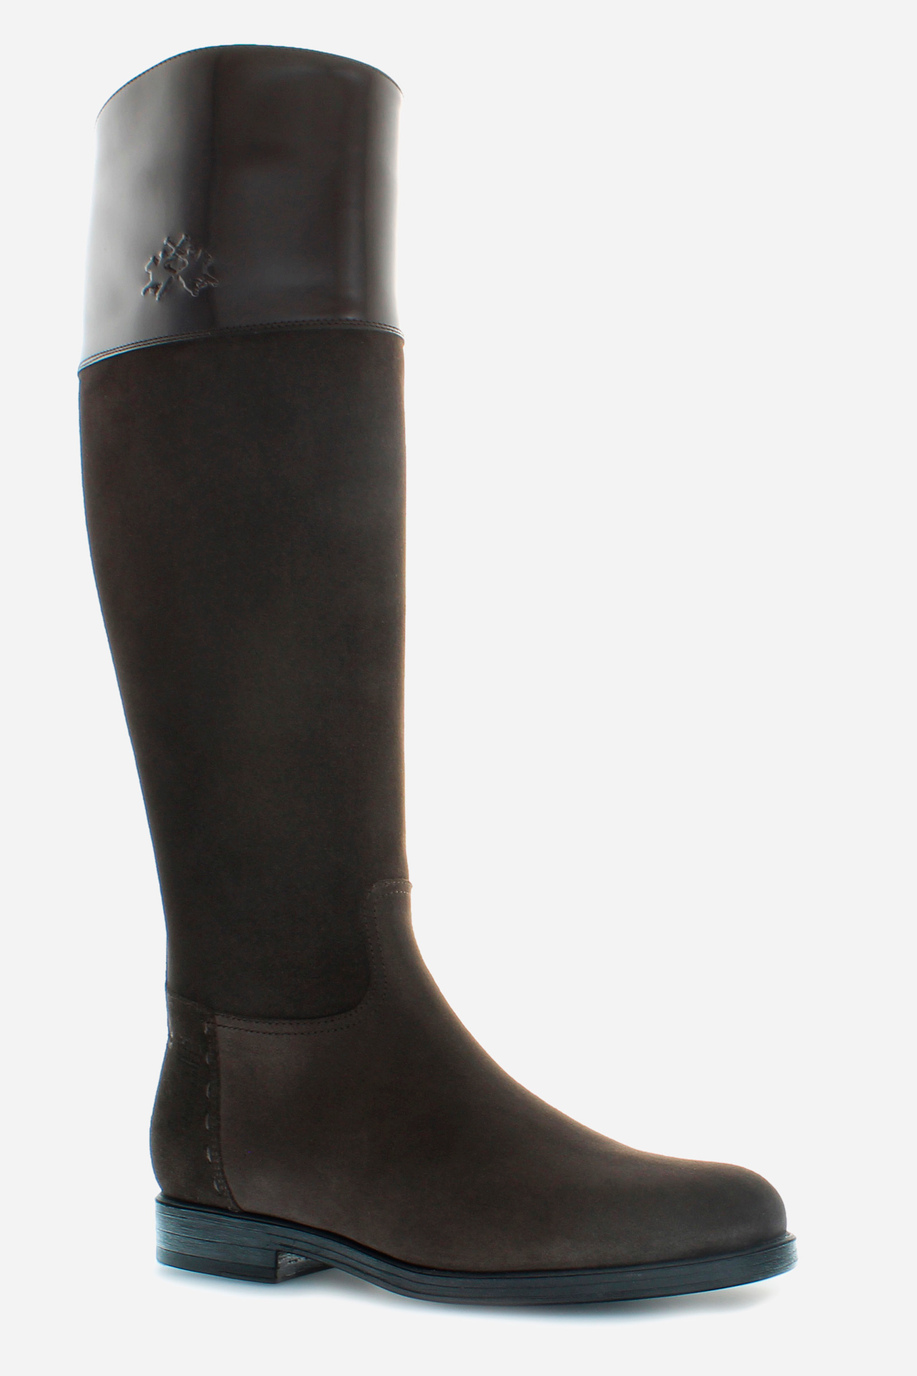 Women’s equestrian style boot in suede - Our favourites for her | La Martina - Official Online Shop